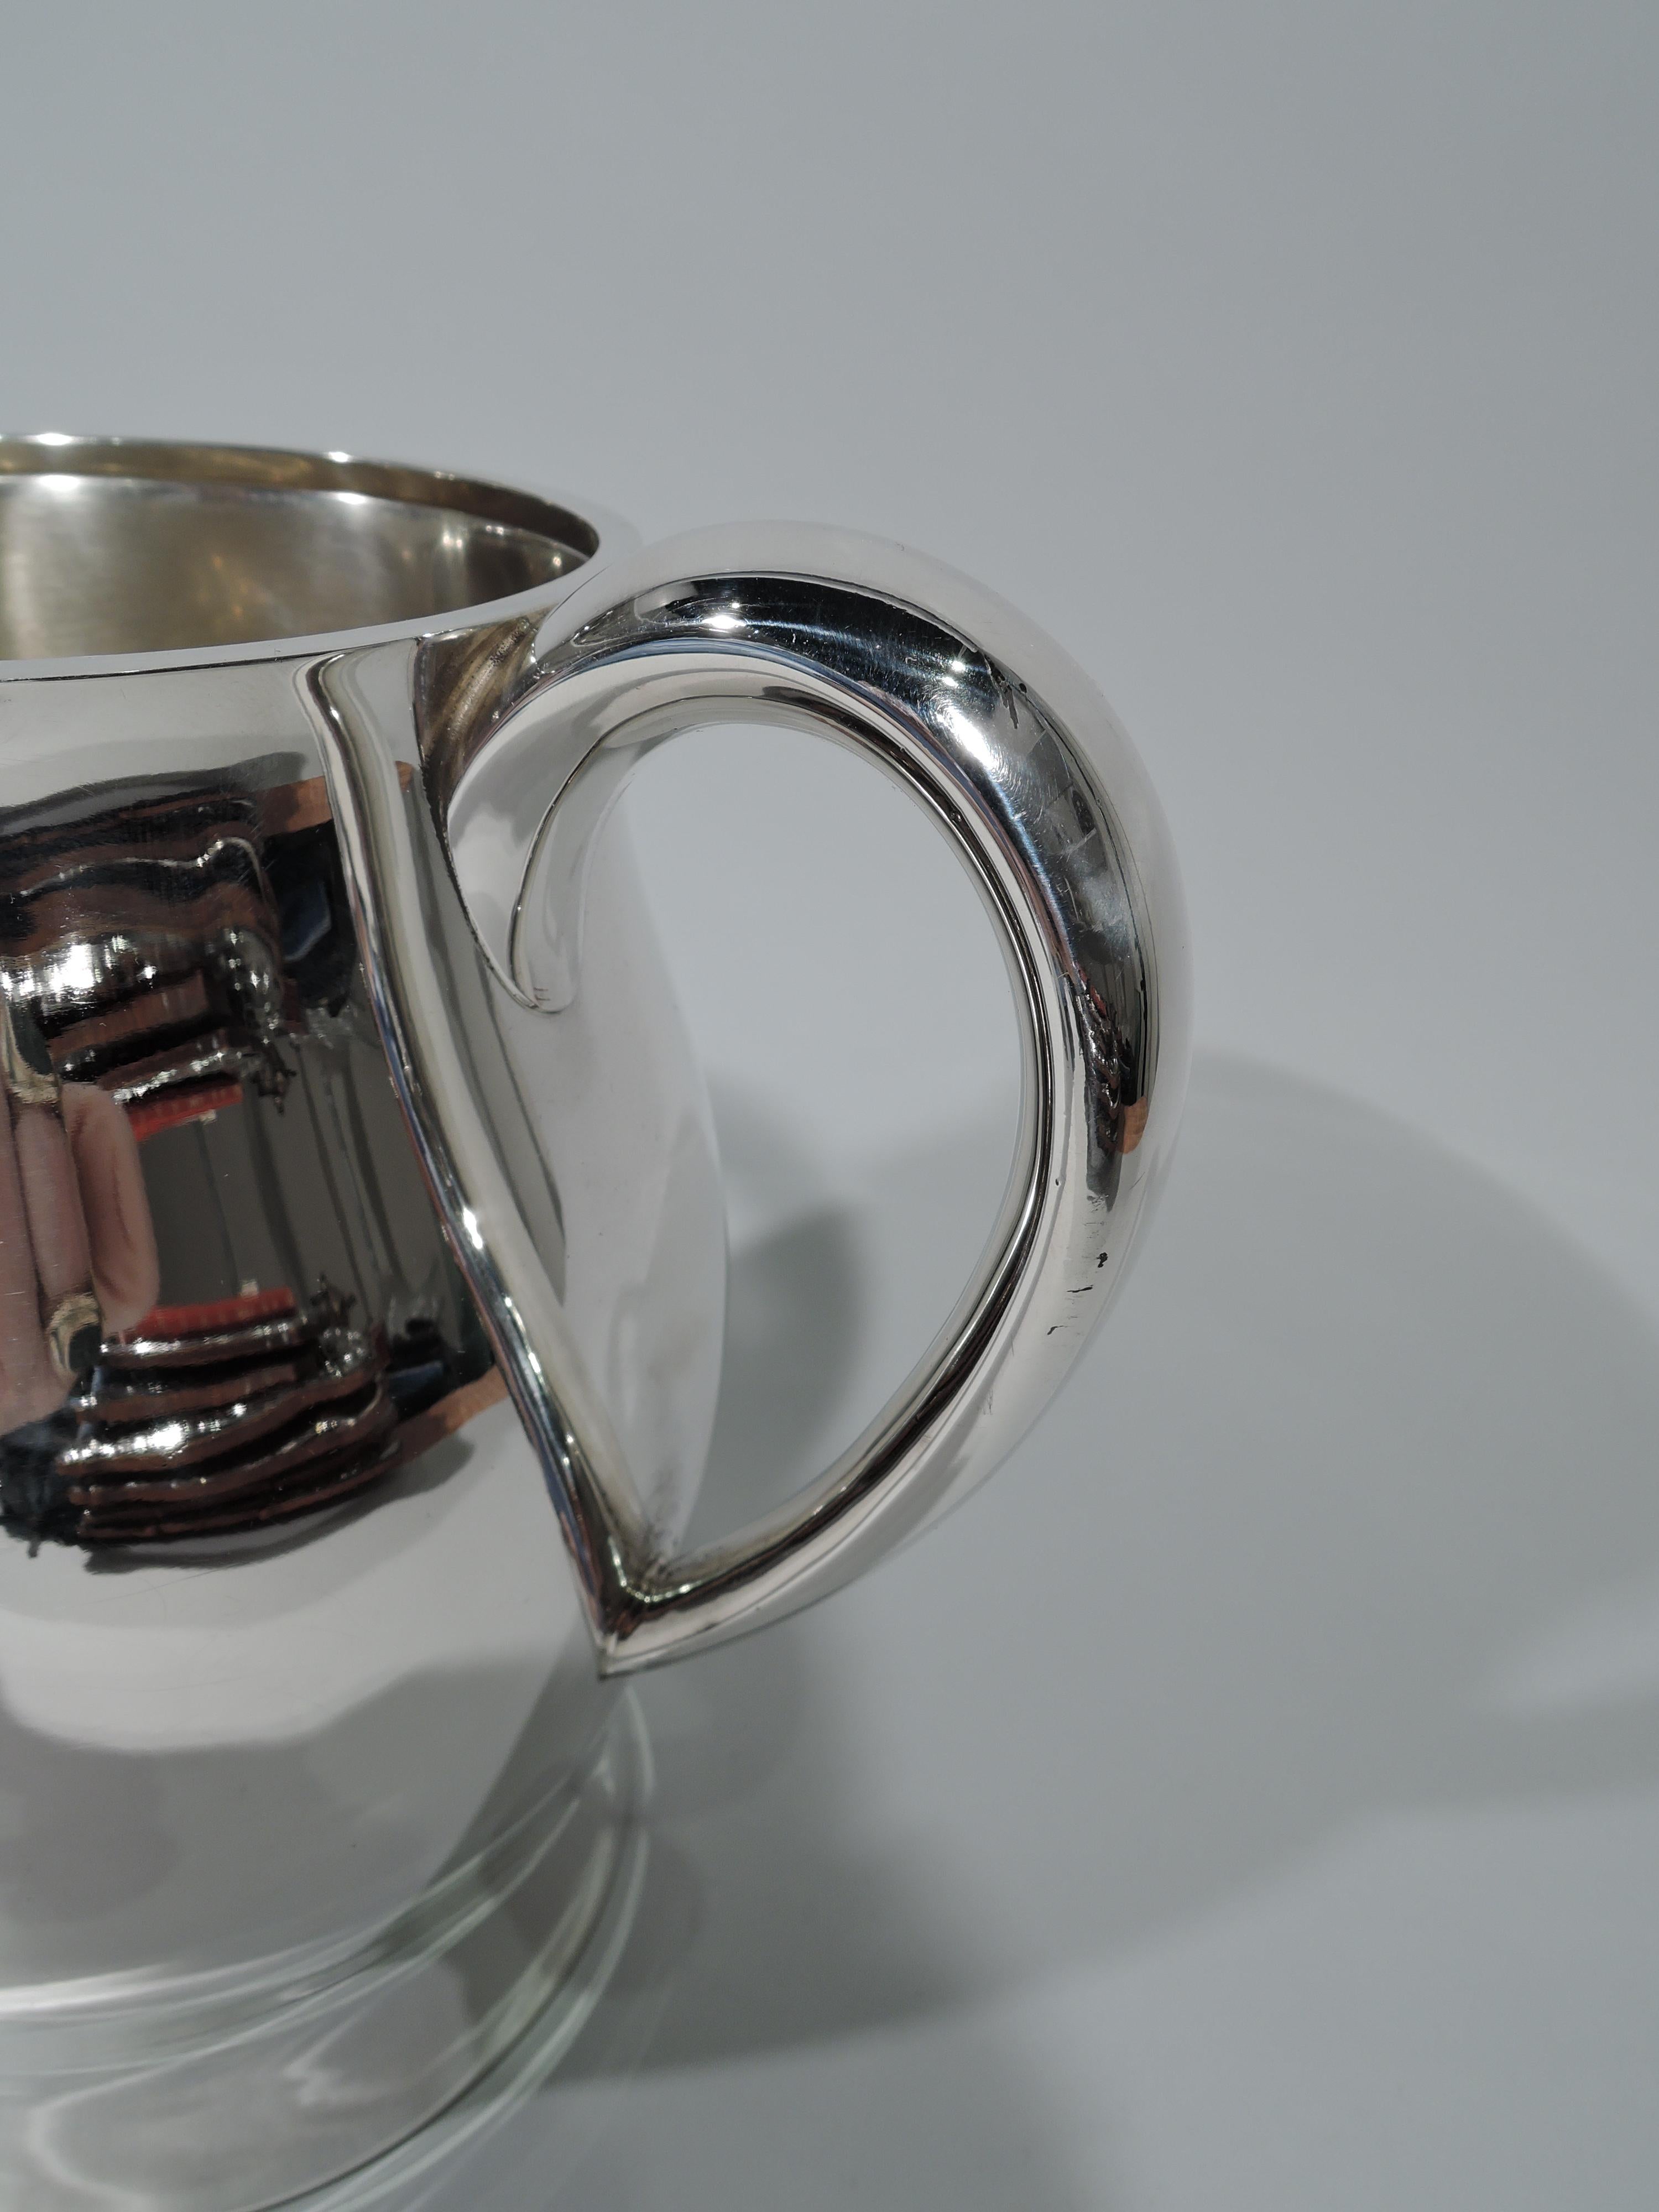 Colonial Revival American Colonial Revere Sterling Silver Water Pitcher by Tuttle